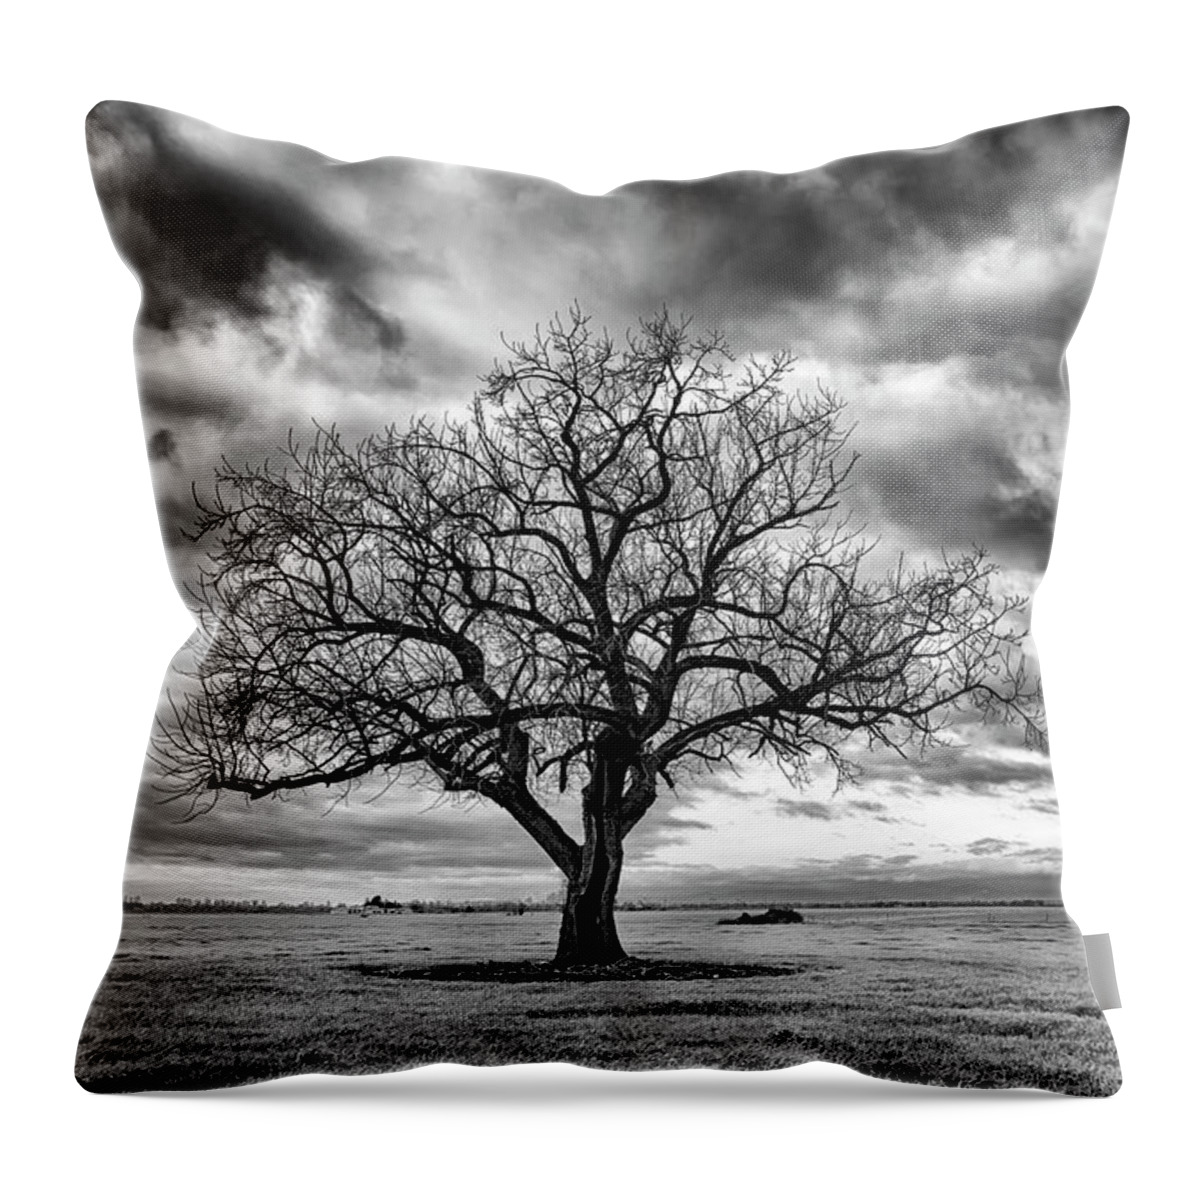 Country Images Throw Pillow featuring the photograph Standing Watch by Steven Clark